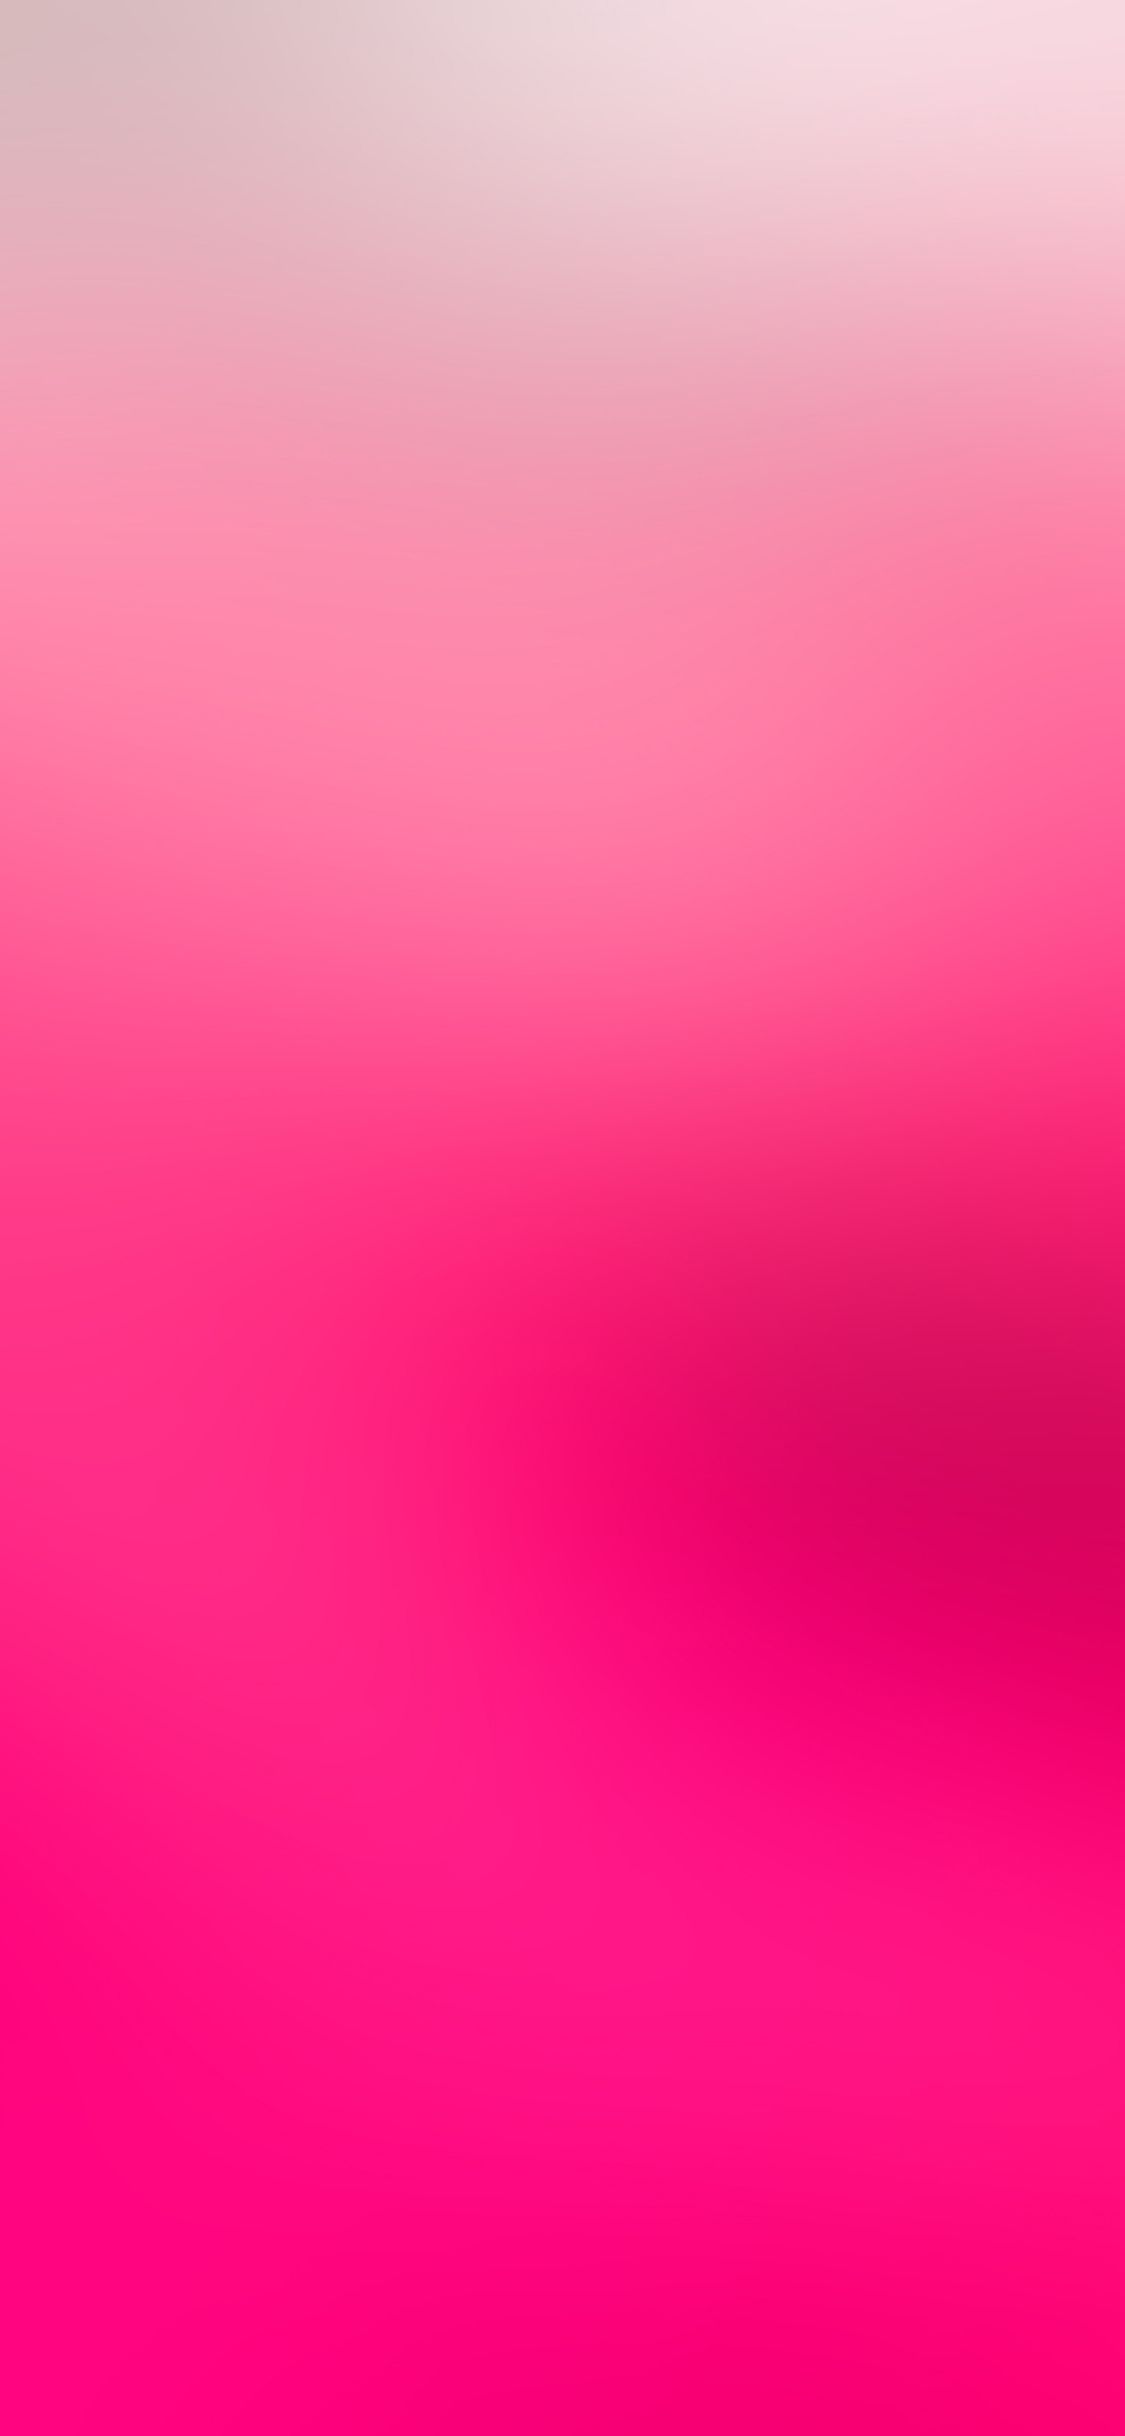 A pink and white ombre background - Pink Panther